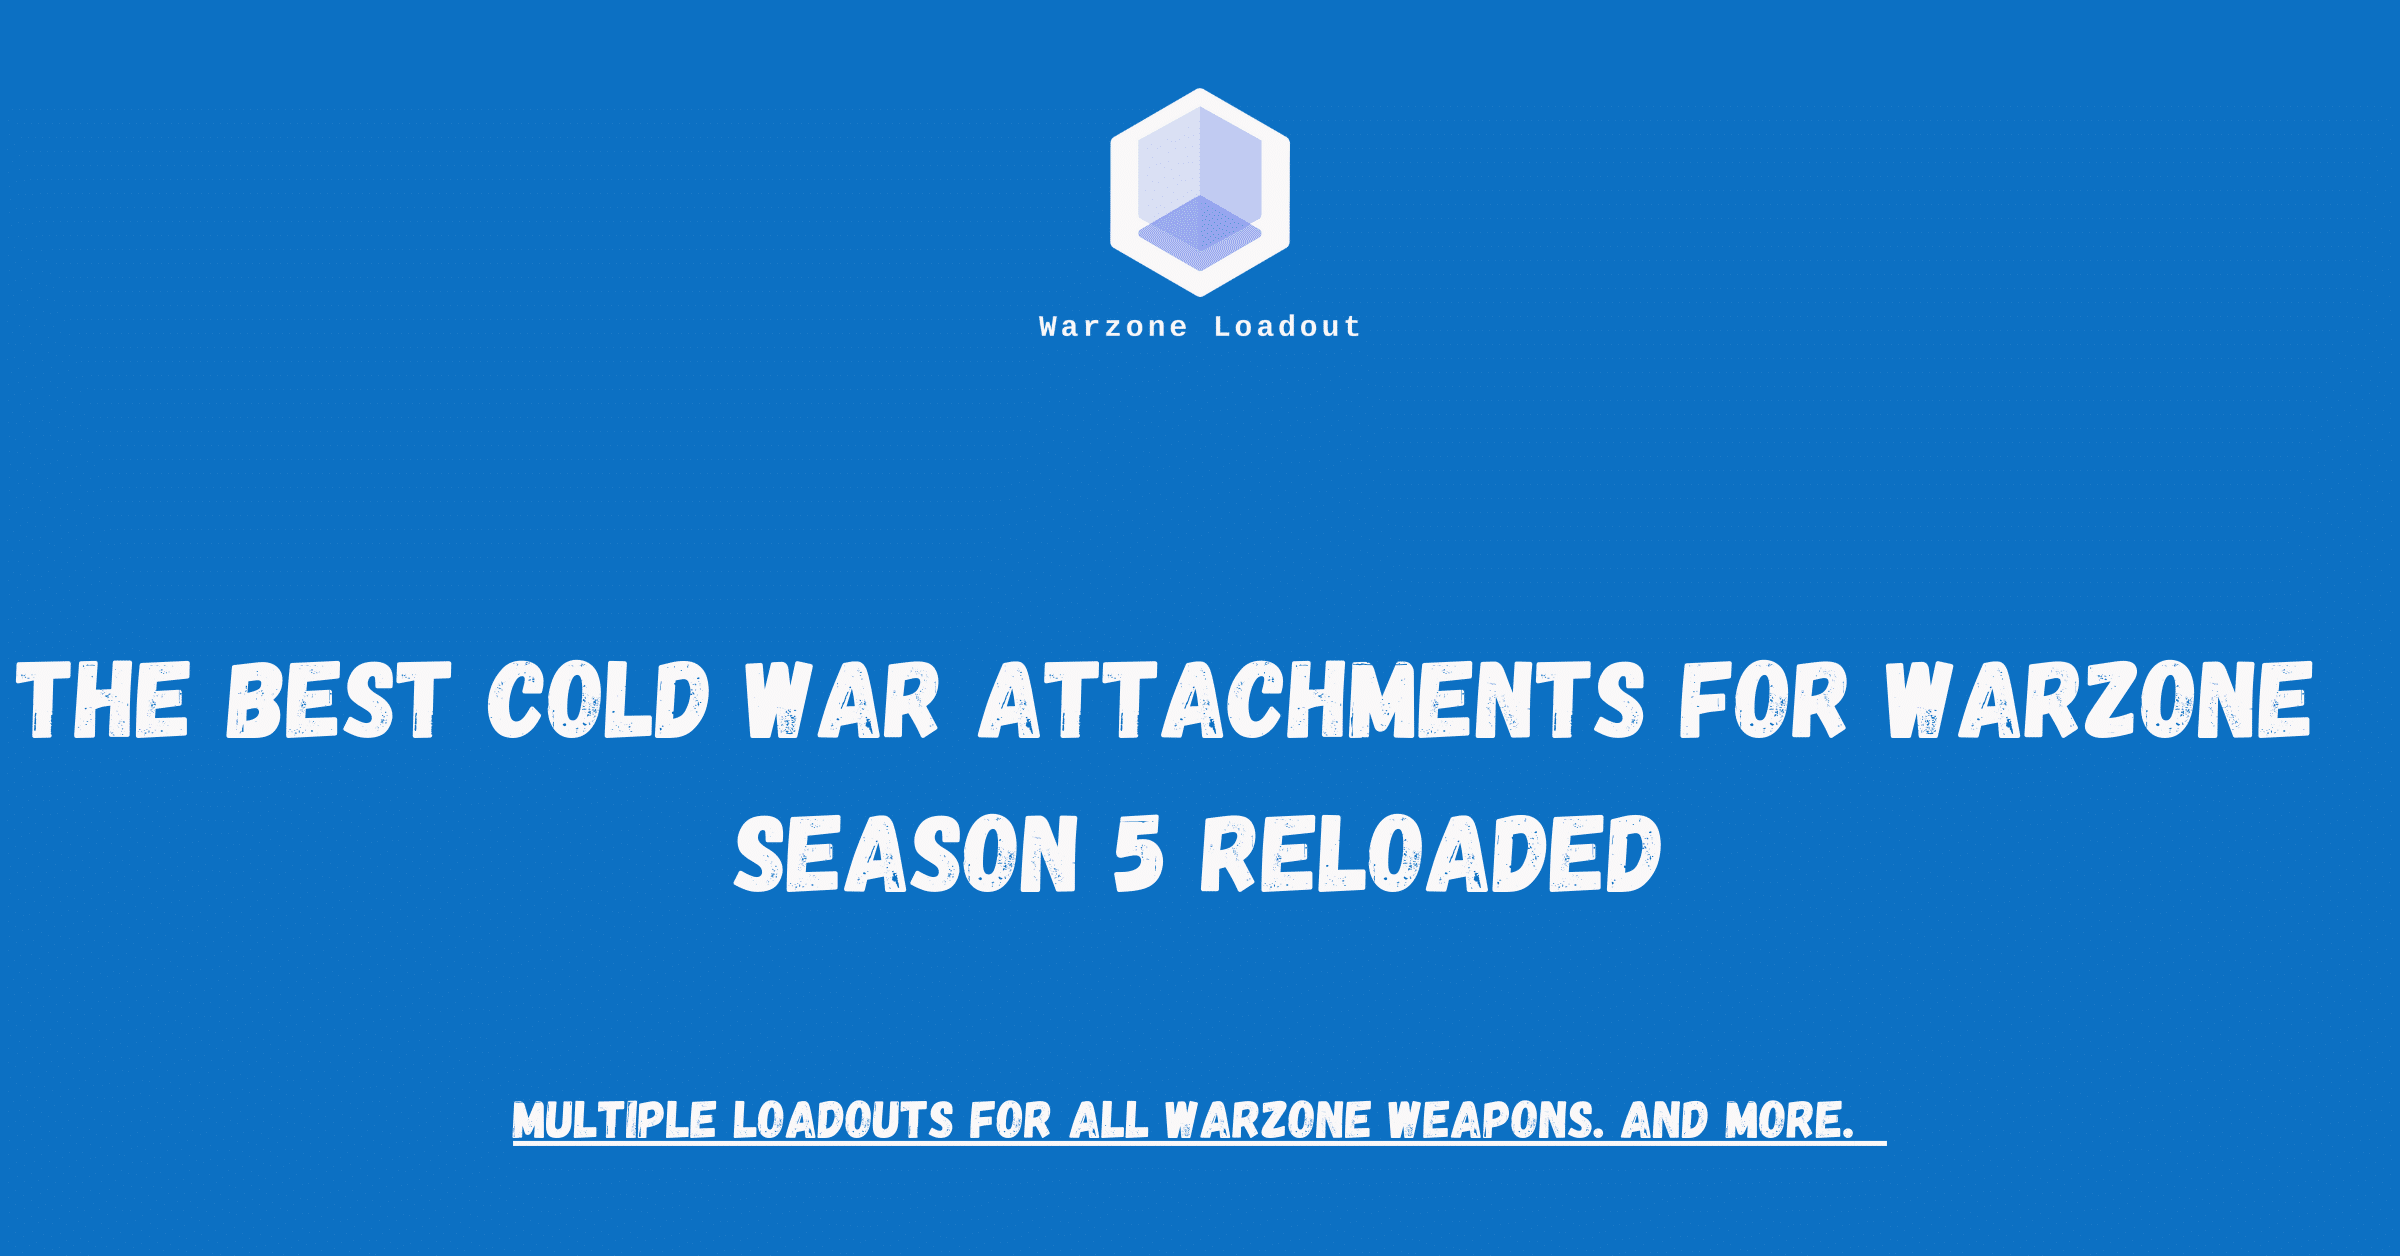 The best cold war attachments for warzone weapons – season 5 reloaded